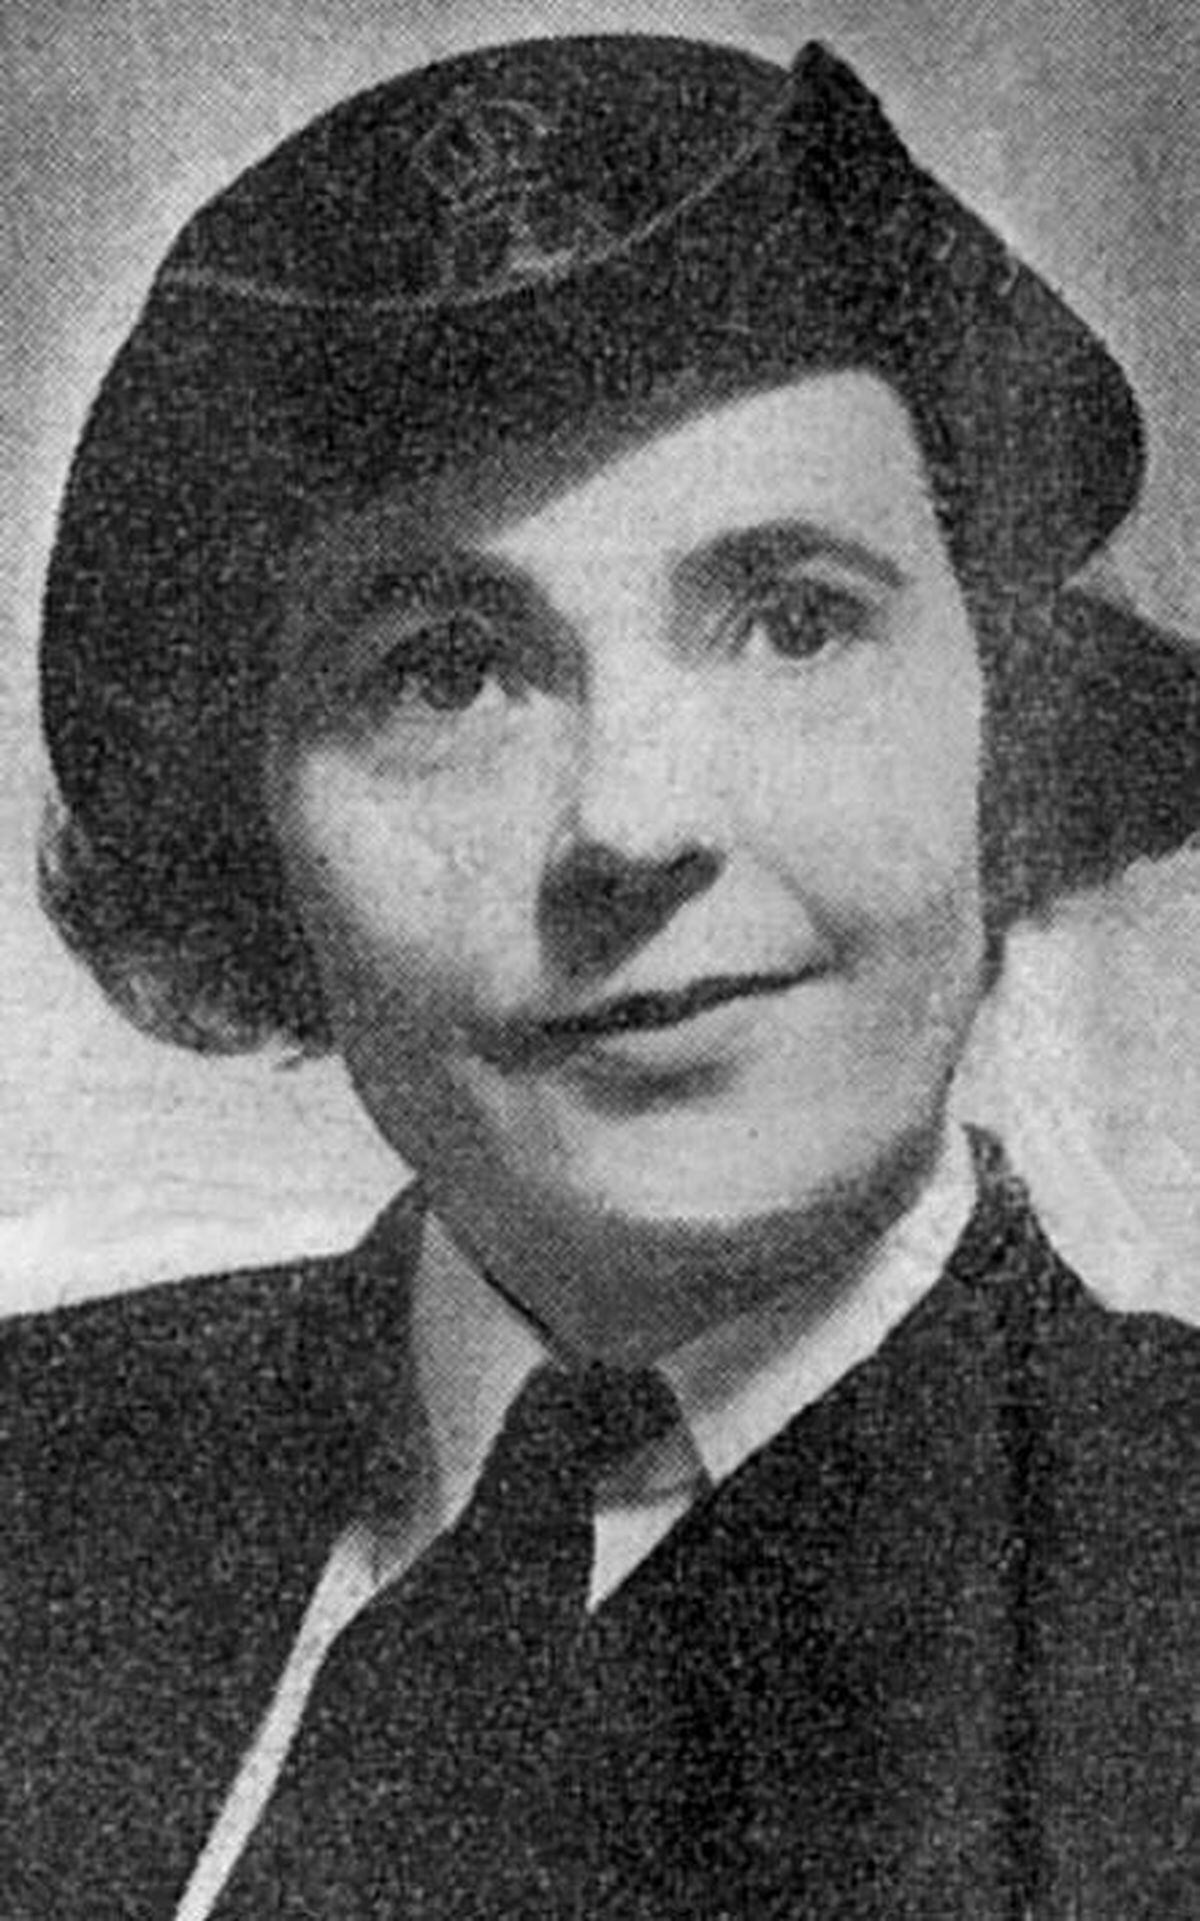 Edith Pargeter served in the Wrens